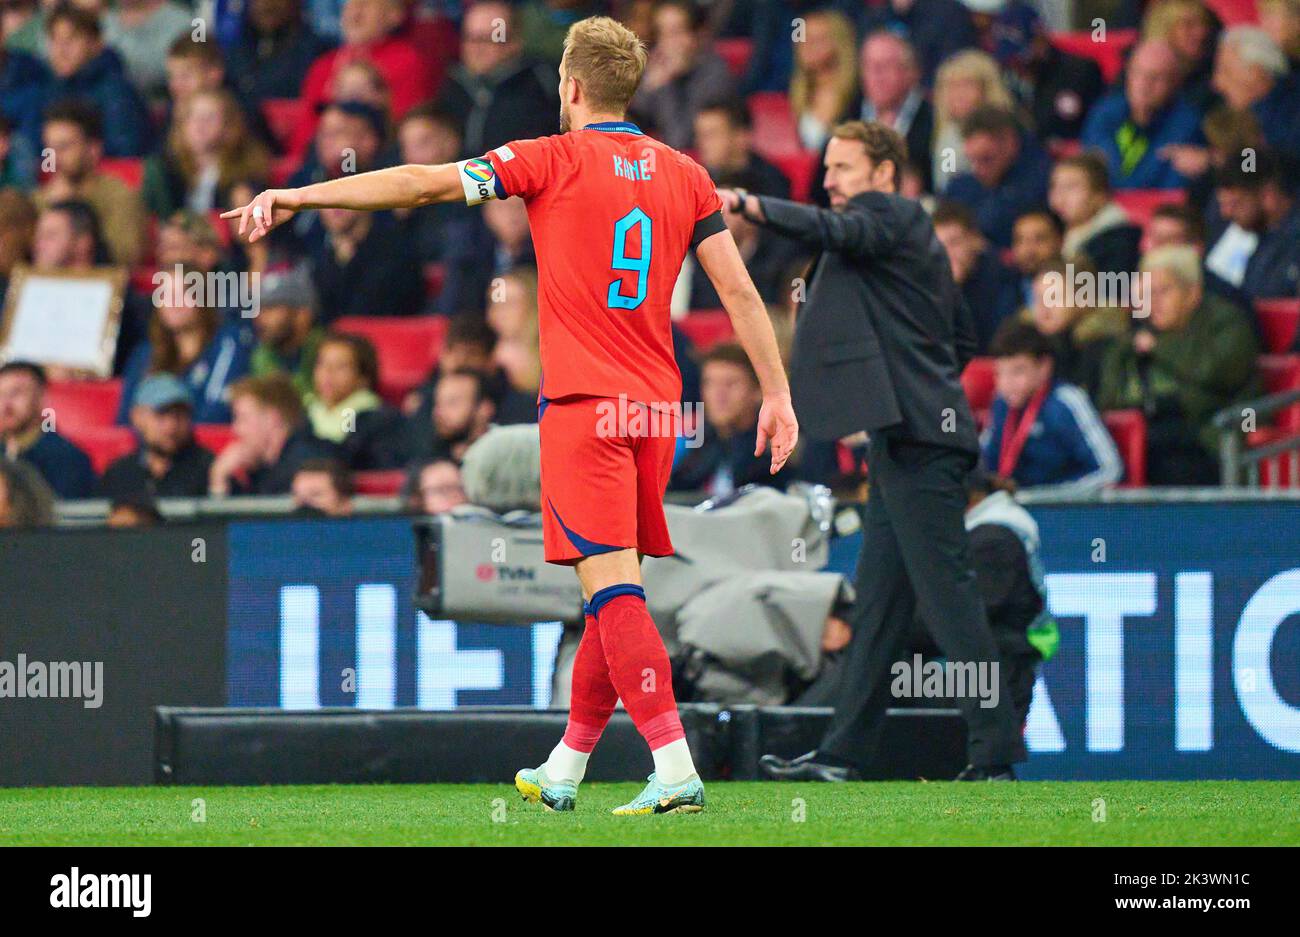 Harry KANE, England 9  geste in the UEFA Nations League 2022 match  ENGLAND - GERMANY 3-3  in Season 2022/2023 on Sept 26, 2022  in London, Great Britain.  © Peter Schatz / Alamy Live News Stock Photo